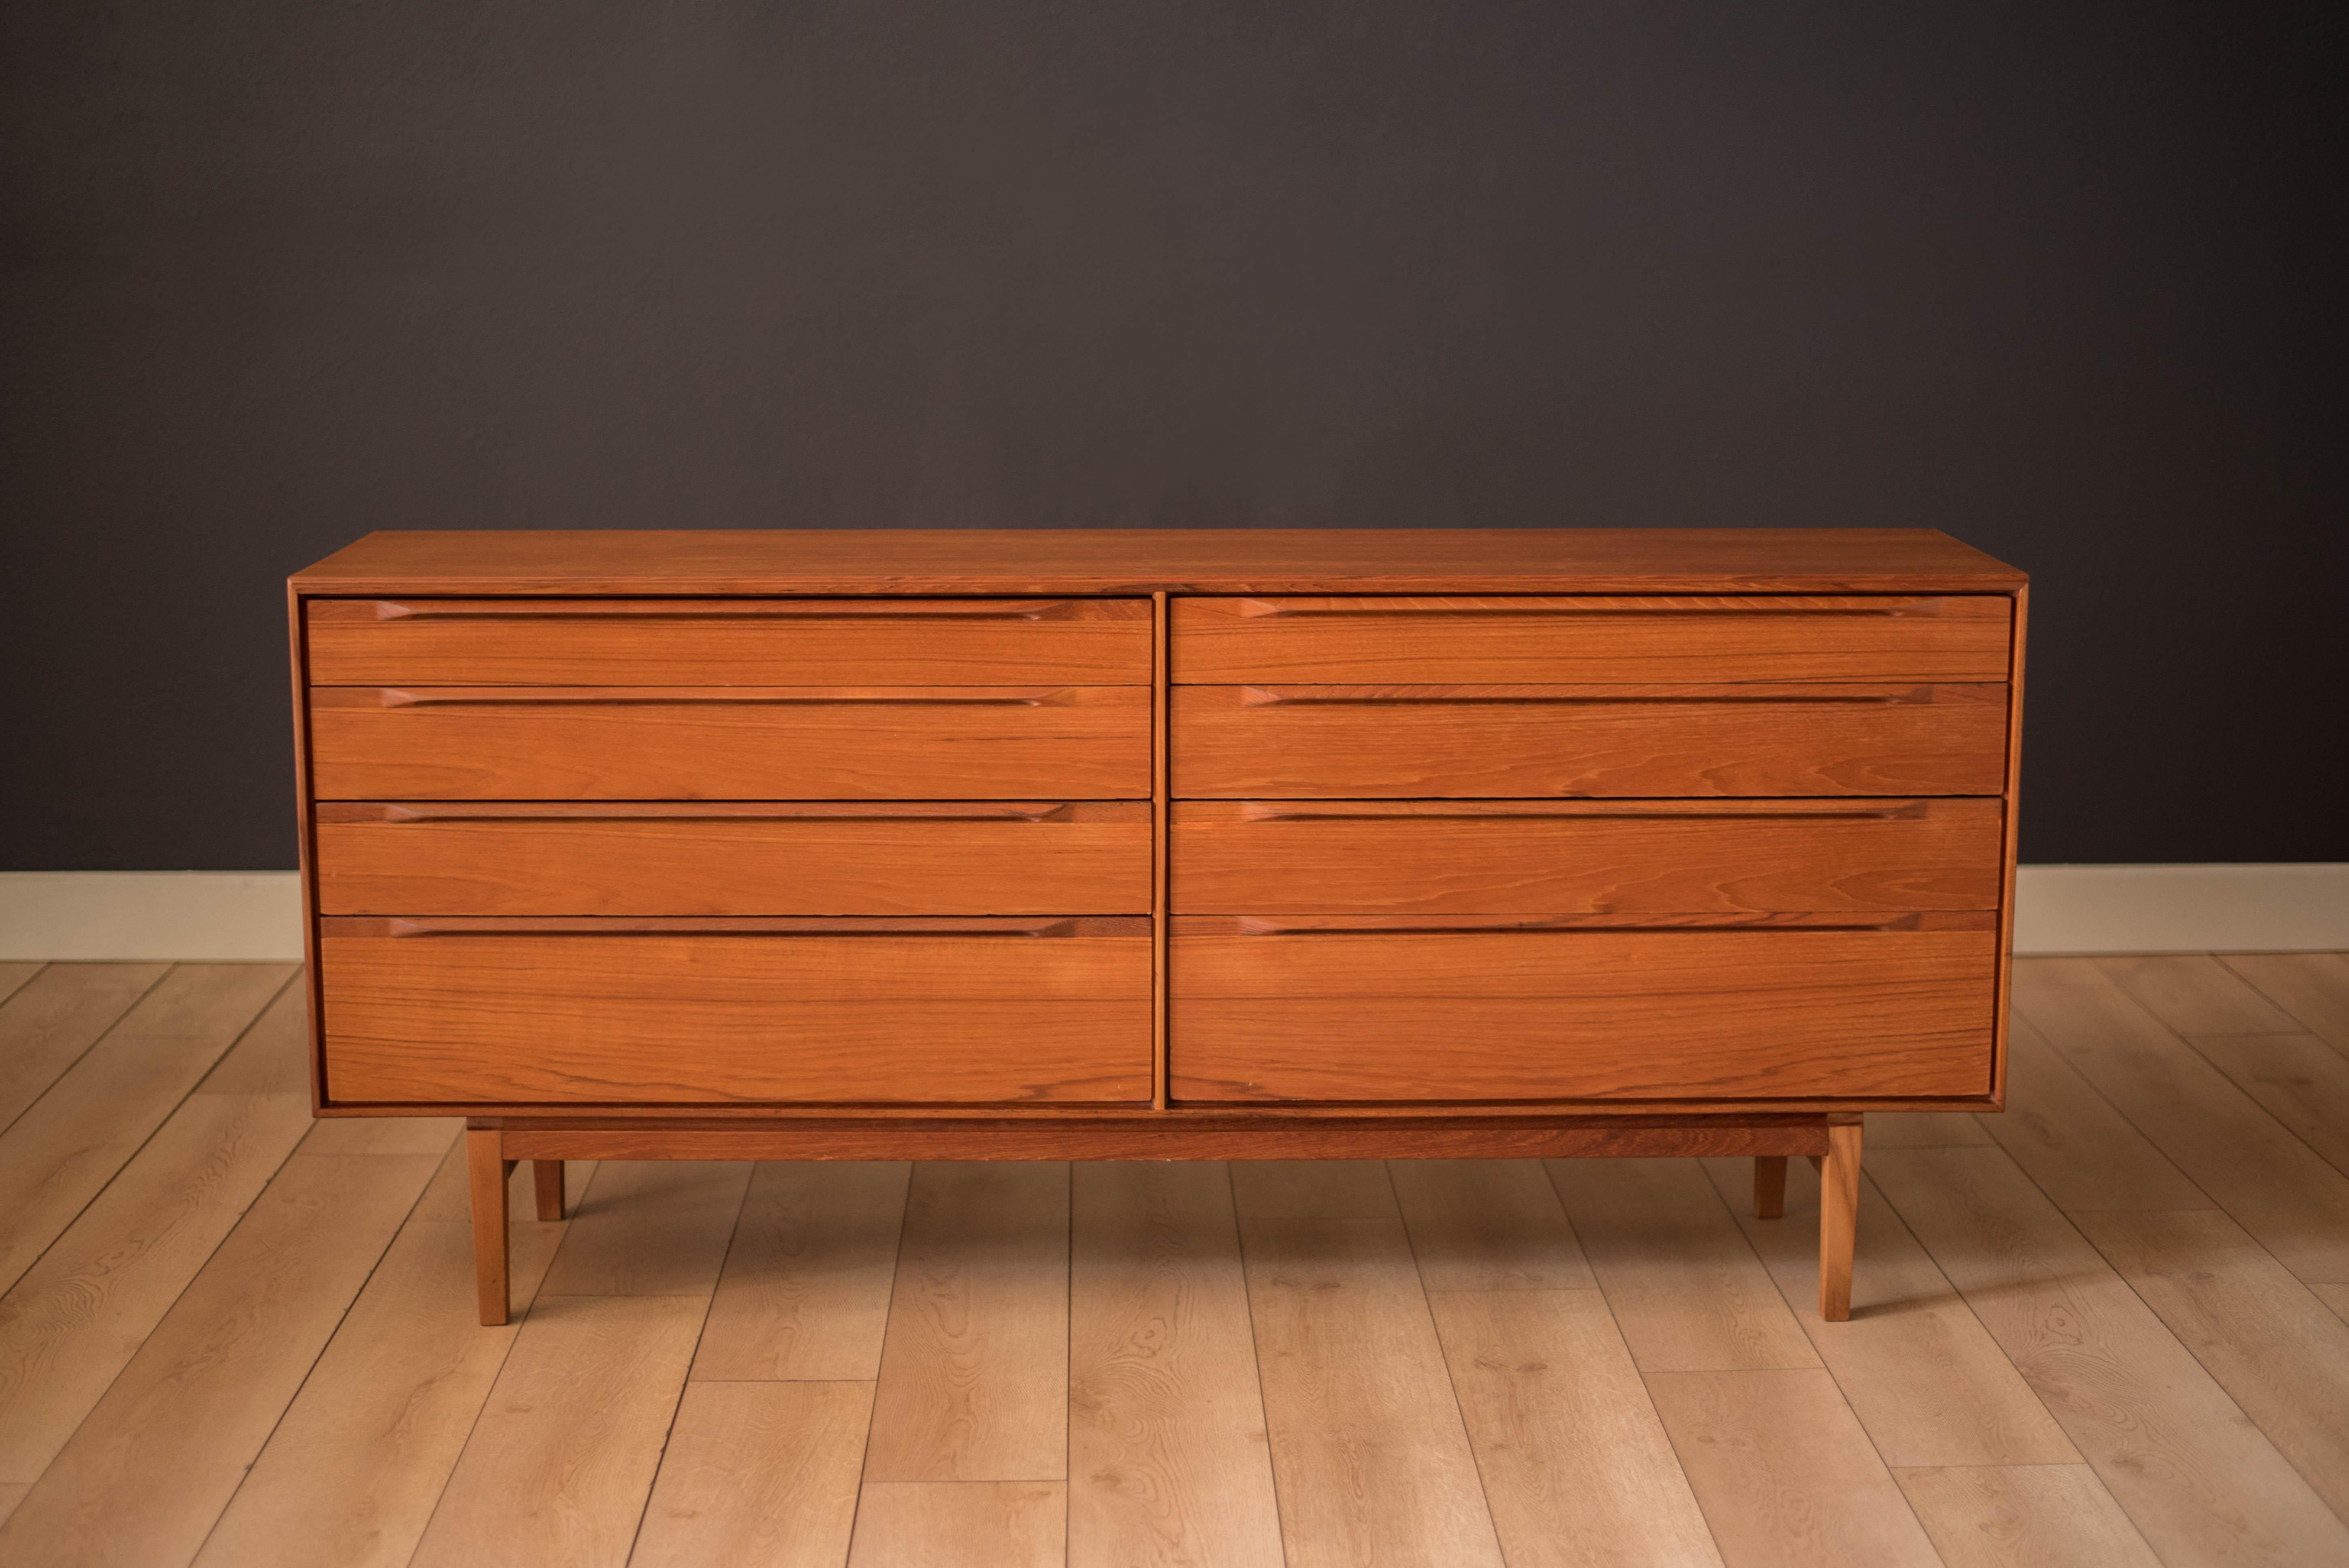 Mid-Century Modern dresser designed by Ib Kofod-Larsen for Fredericia Møbelfabrik in teak. This piece offers plenty of storage including eight dovetailed drawers with contrasting sculpted handles and detailed construction. Additional organizing